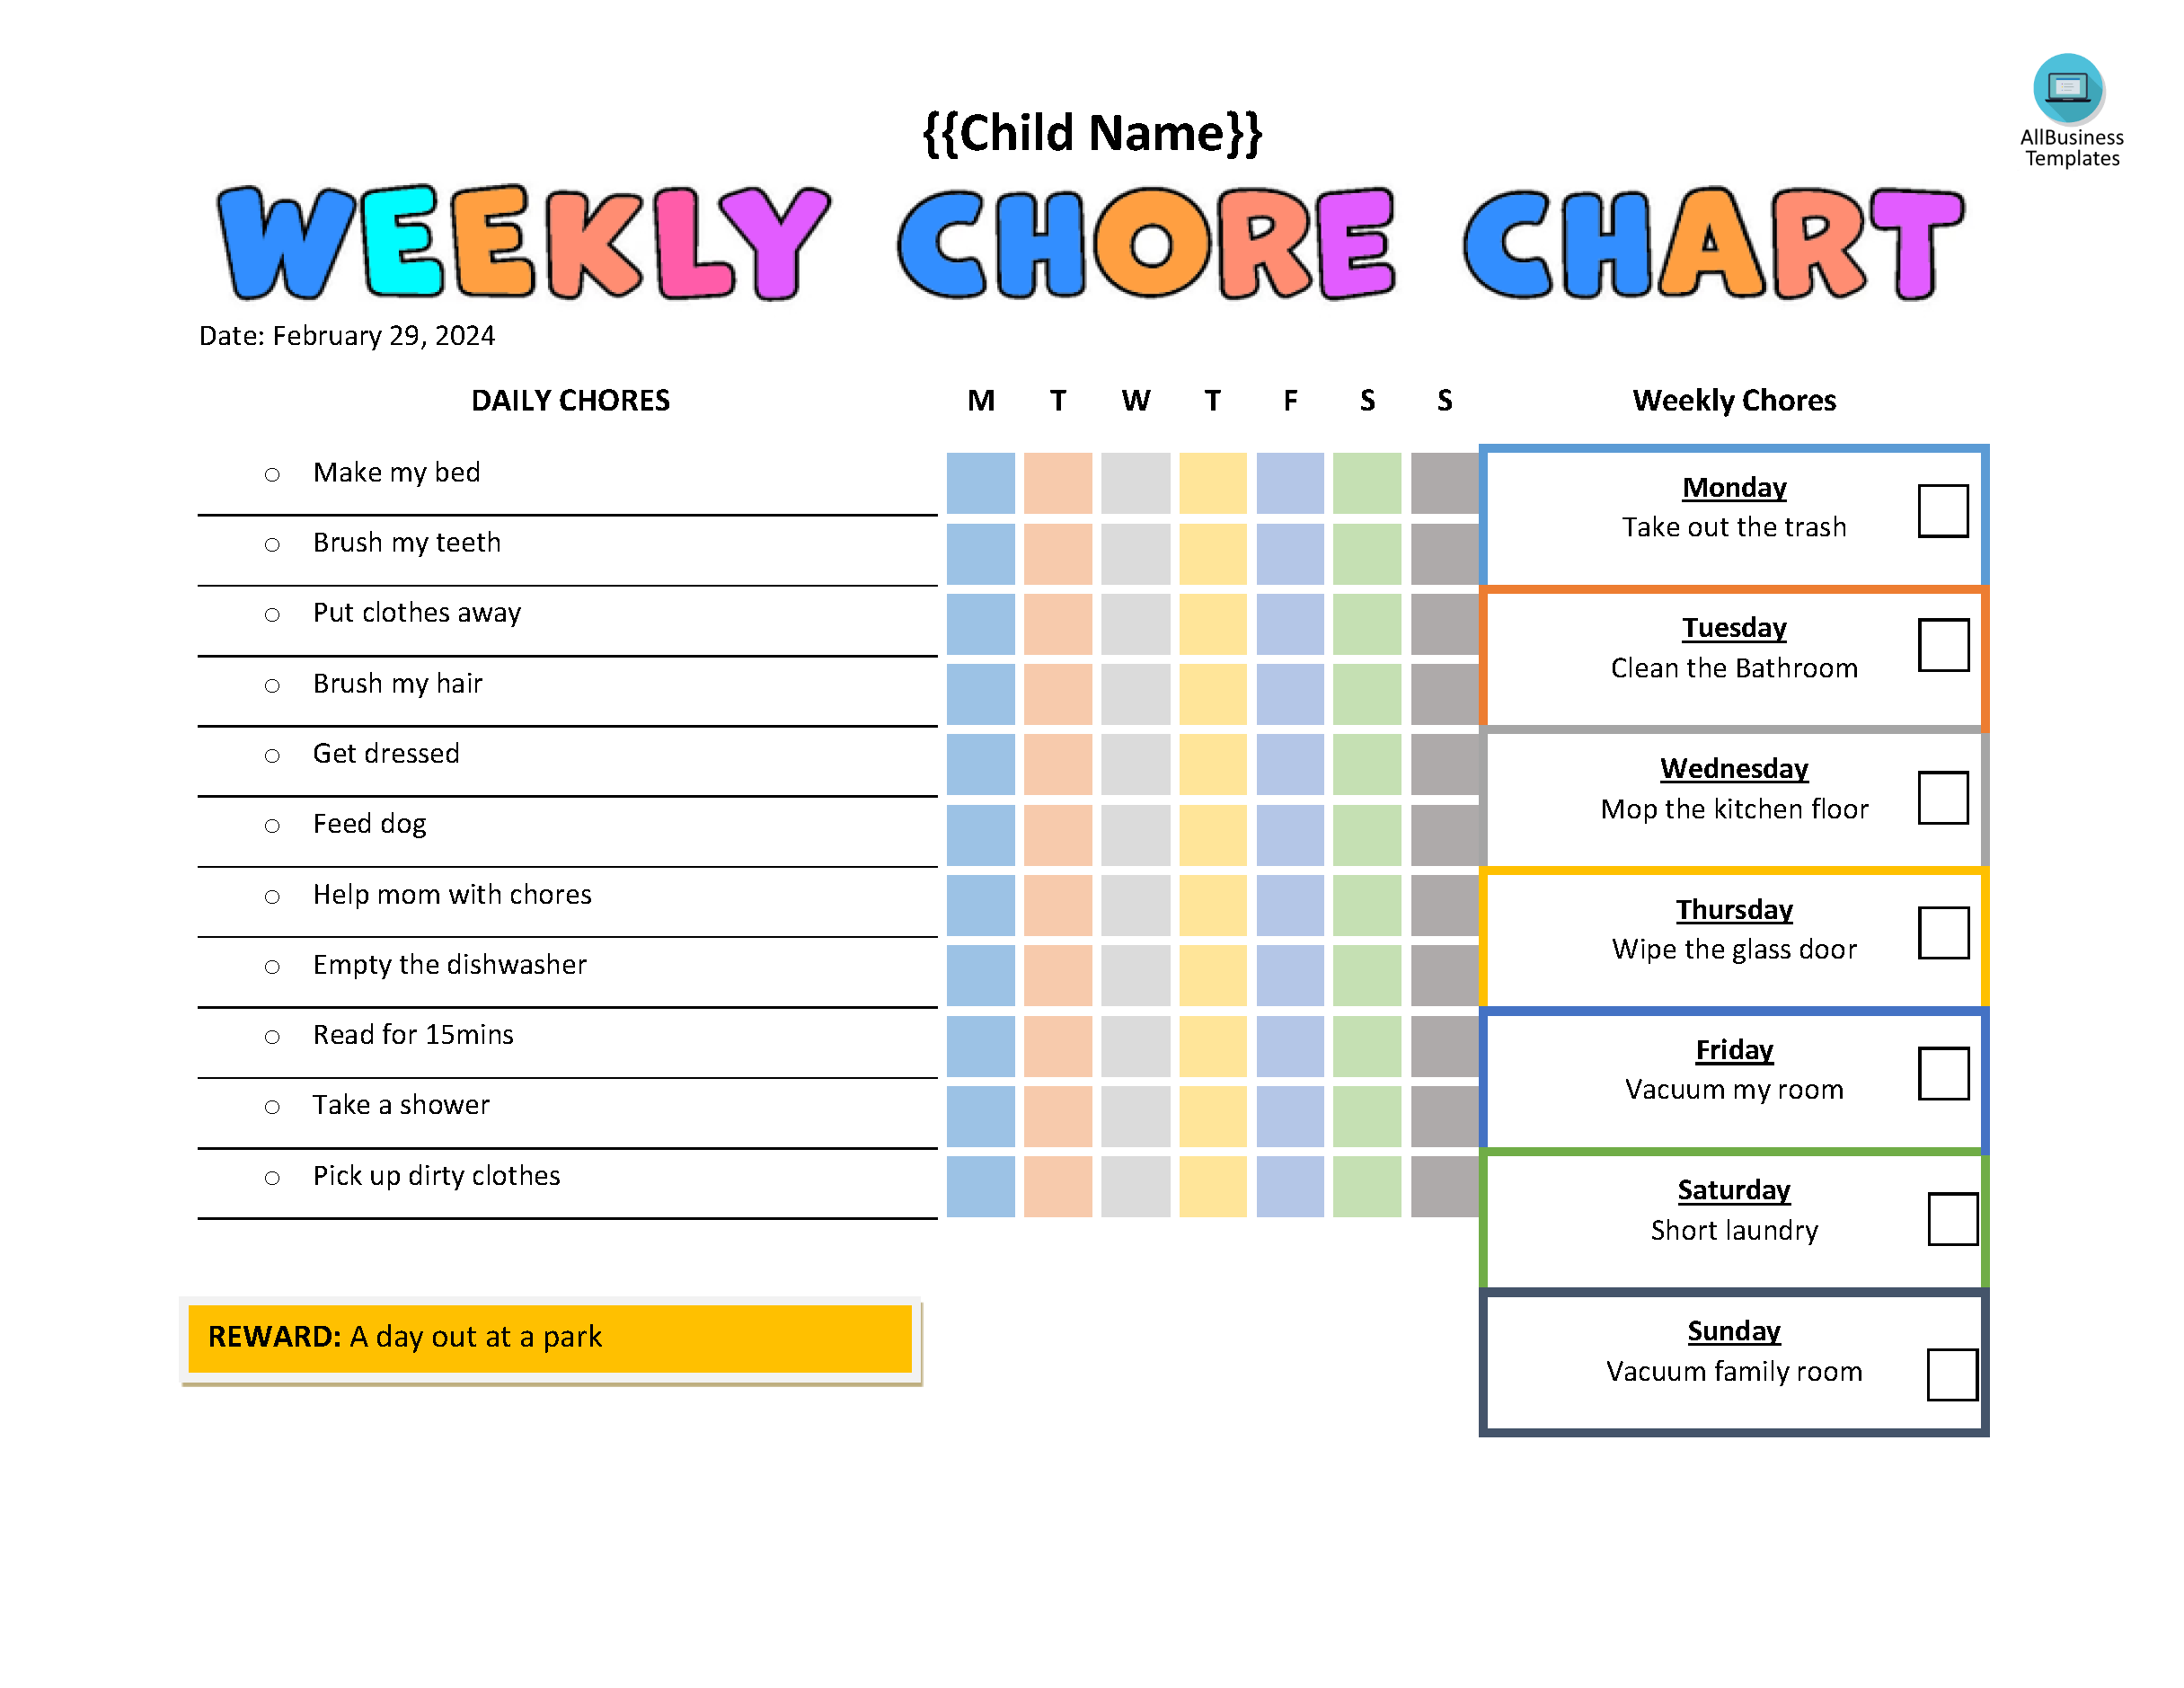 Weekly Chore Chart For Kids Templates at